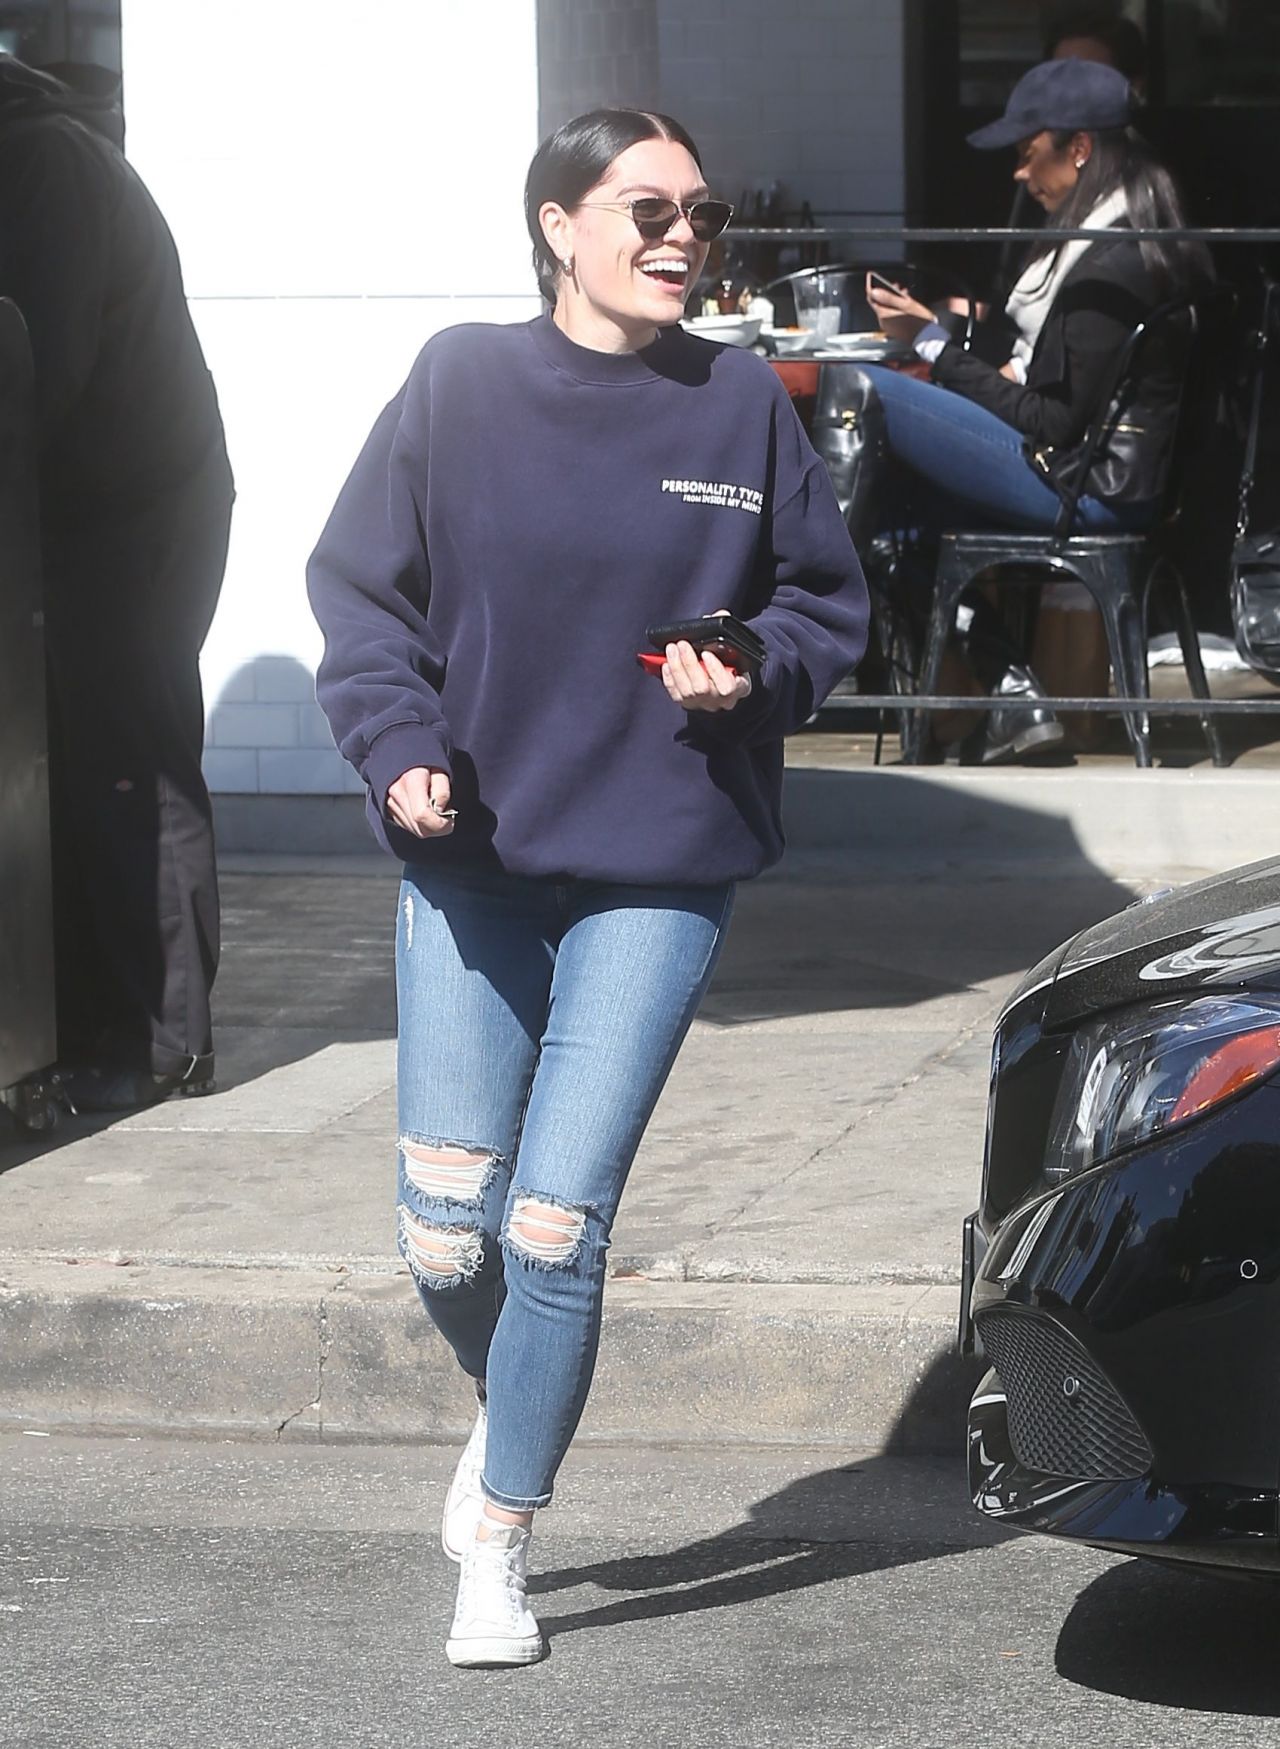 Jessie J in Ripped Jeans Out in LA, February 20181280 x 1749